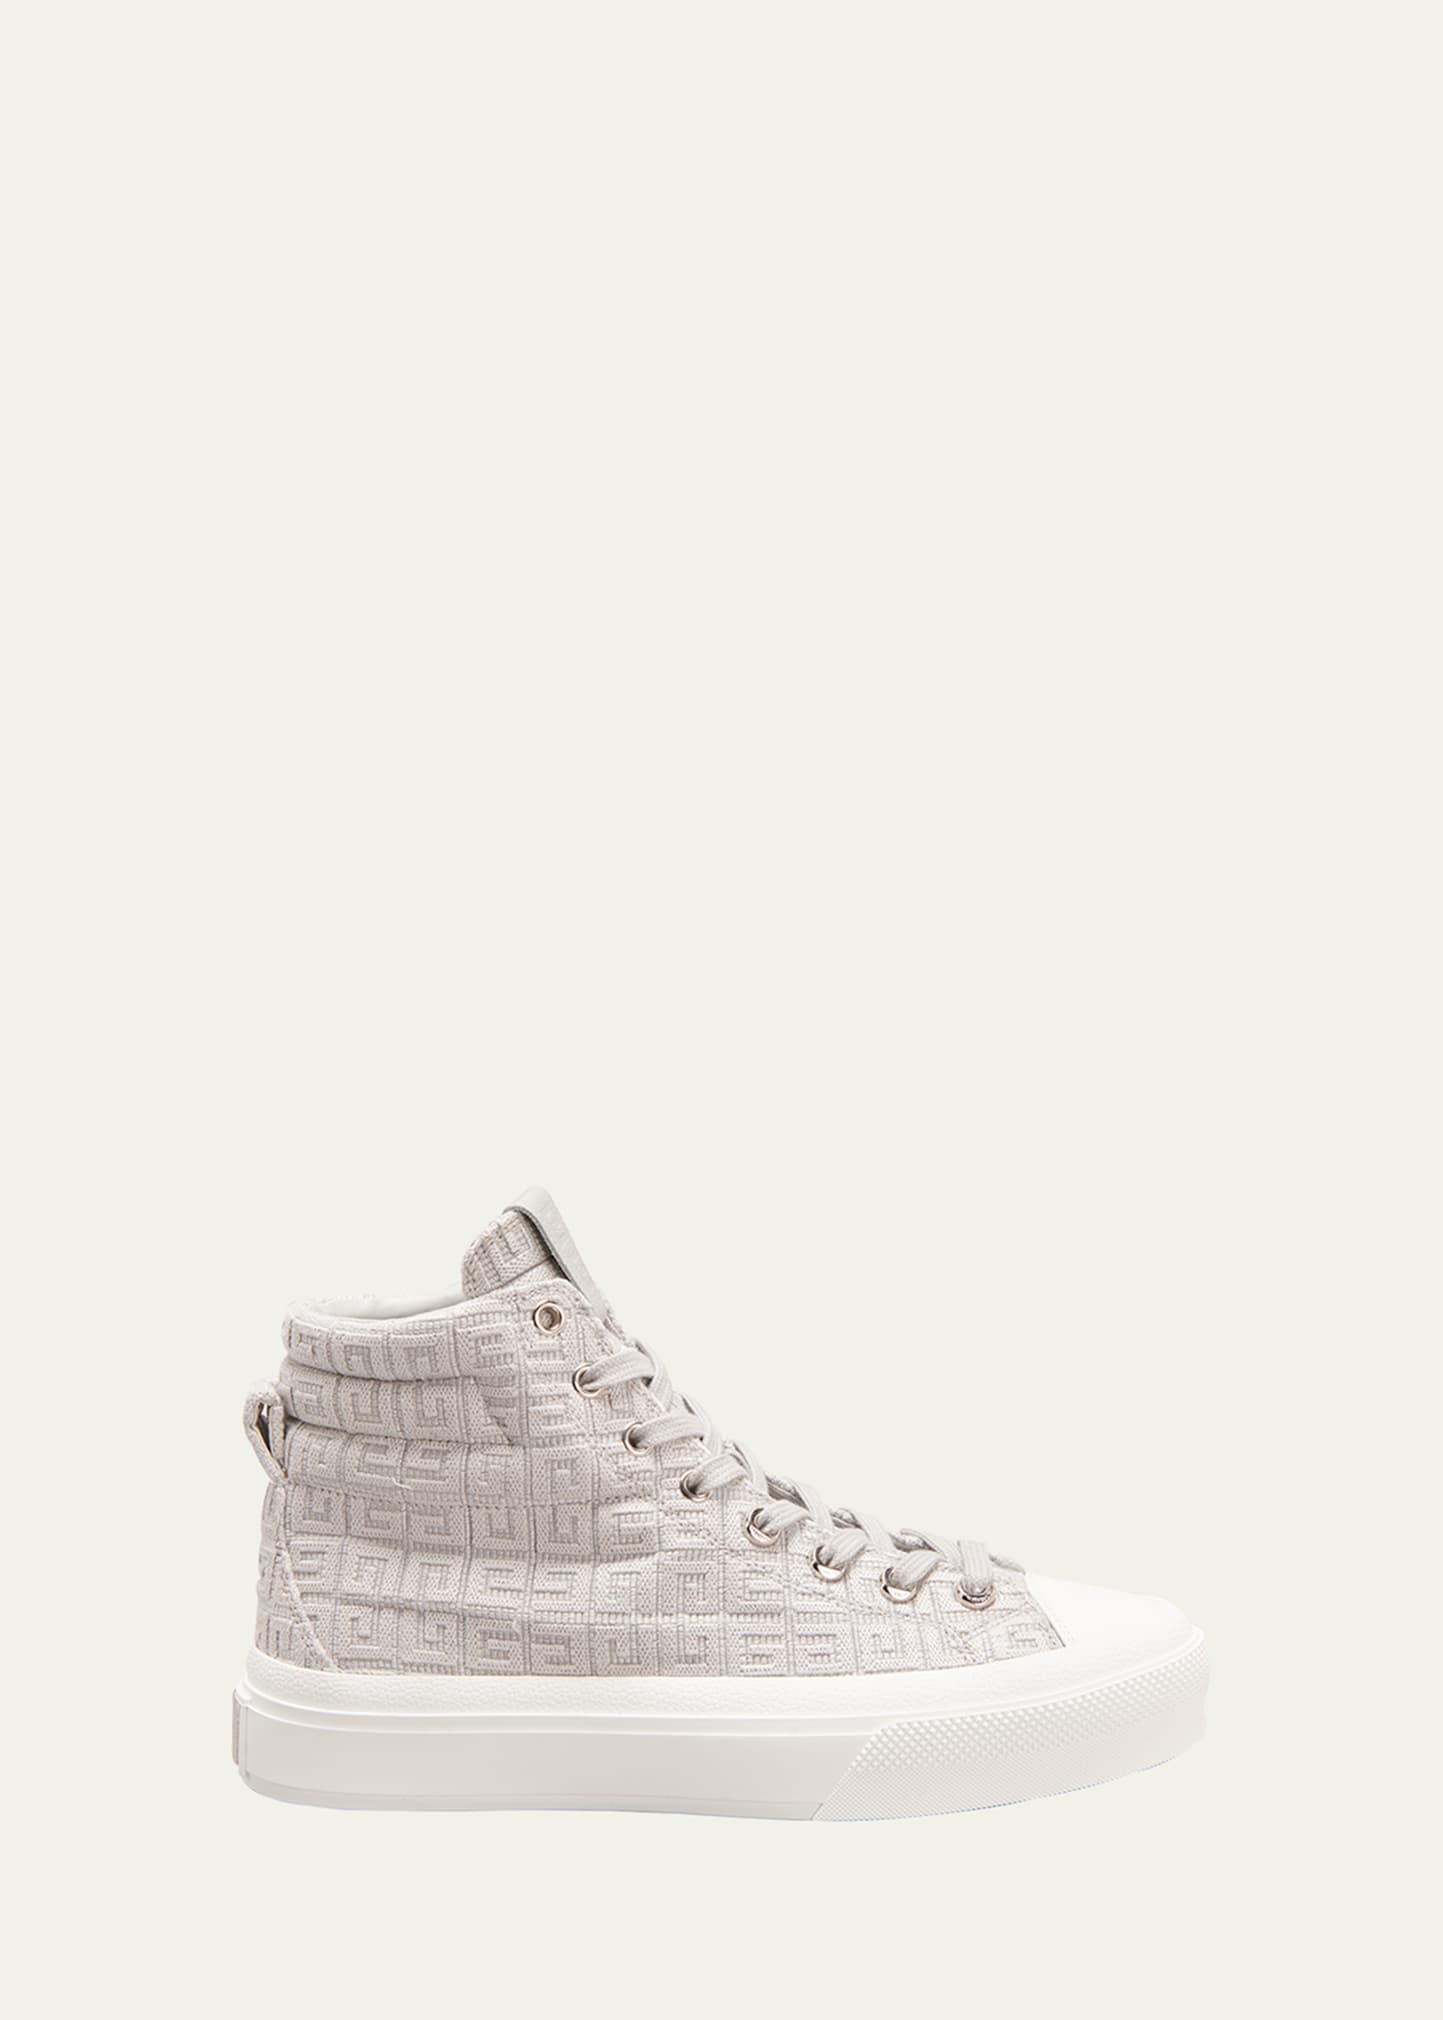 Givenchy Men's City 4G-Jacquard Textile High-Top Sneakers